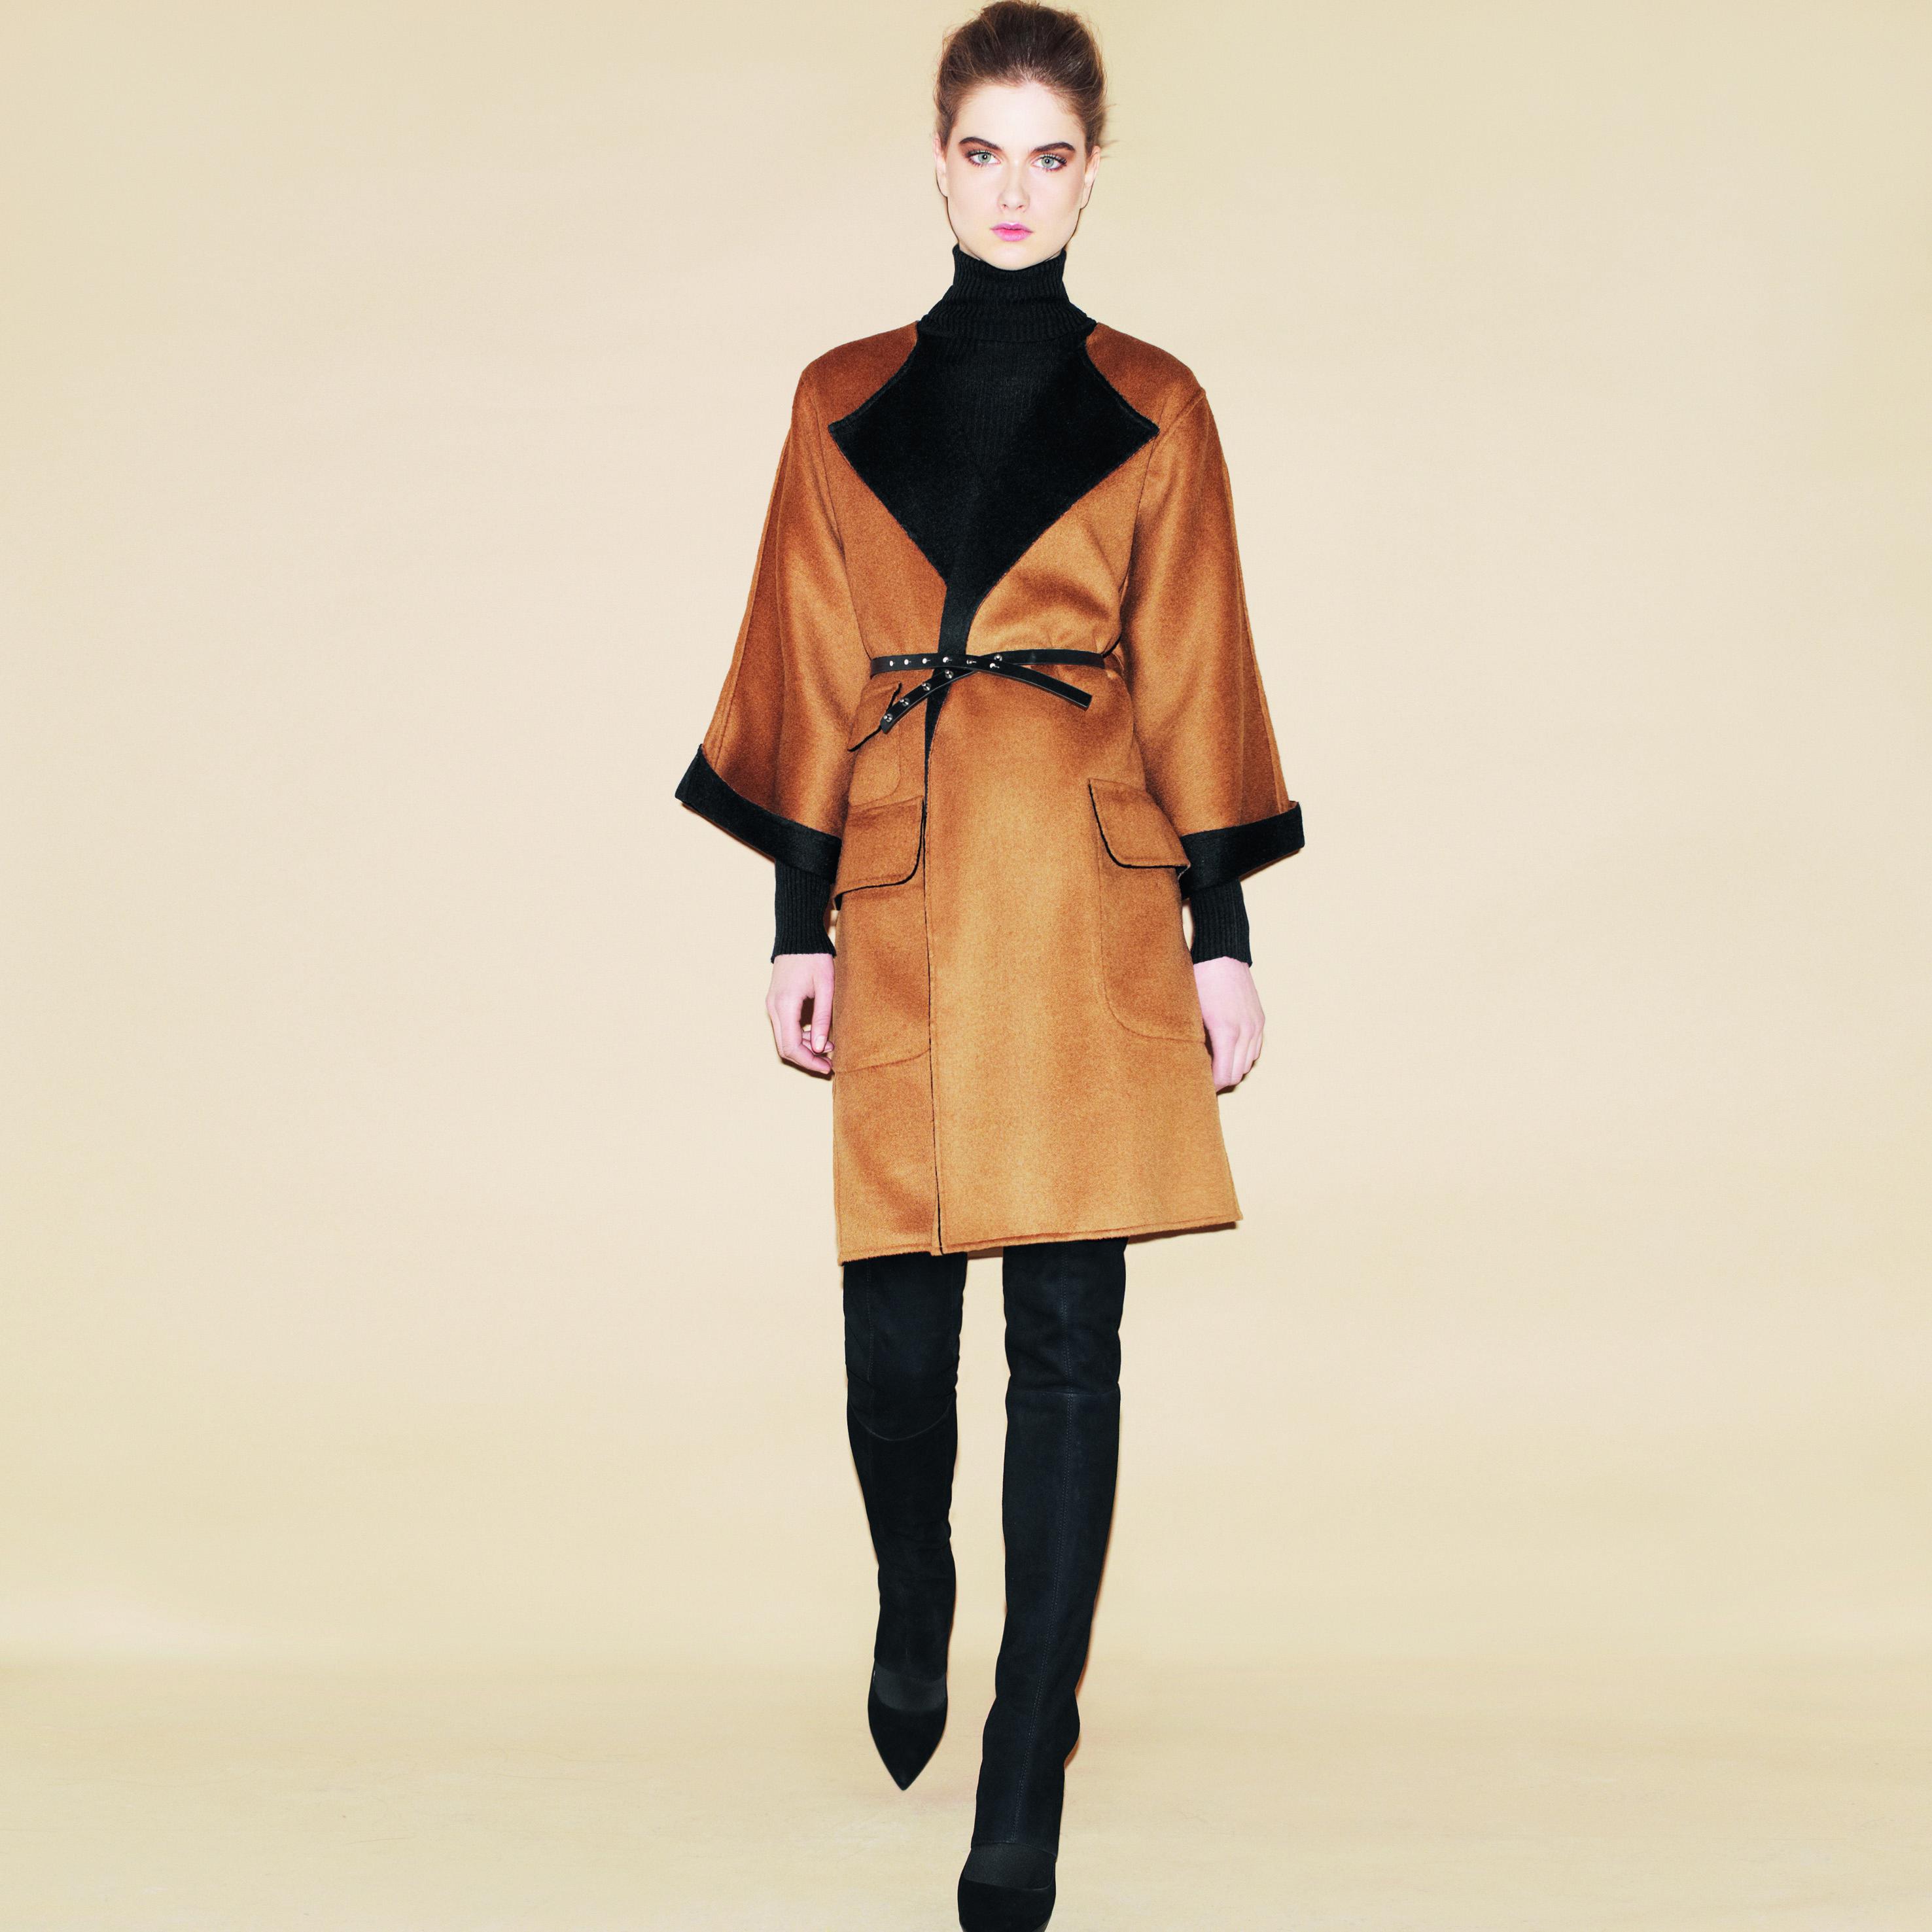 Hobbs AW 2011 Unlimited Look Book 2